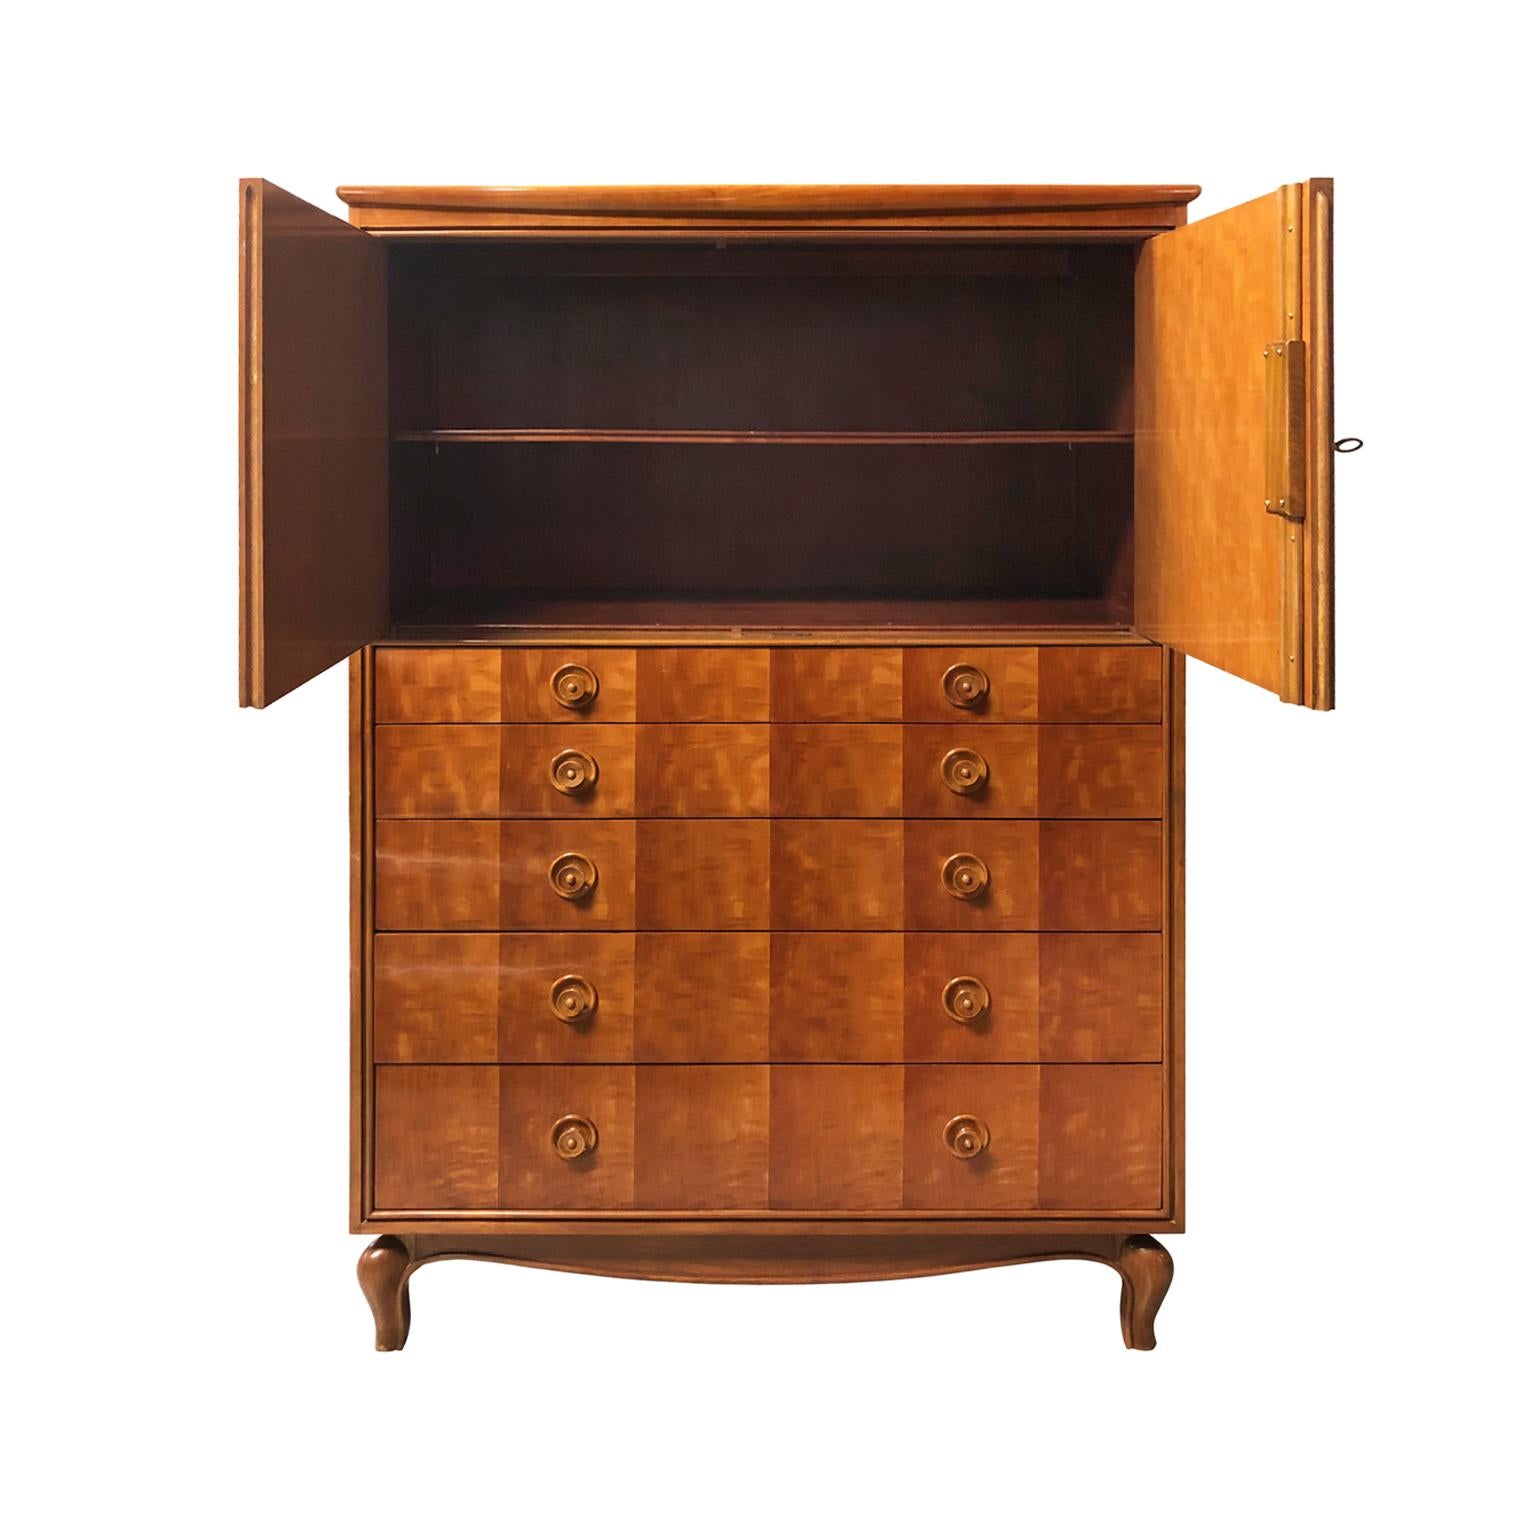 Midcentury chest of drawers with diamond inlay detail and locking shelved cabinet. France, 1950s.